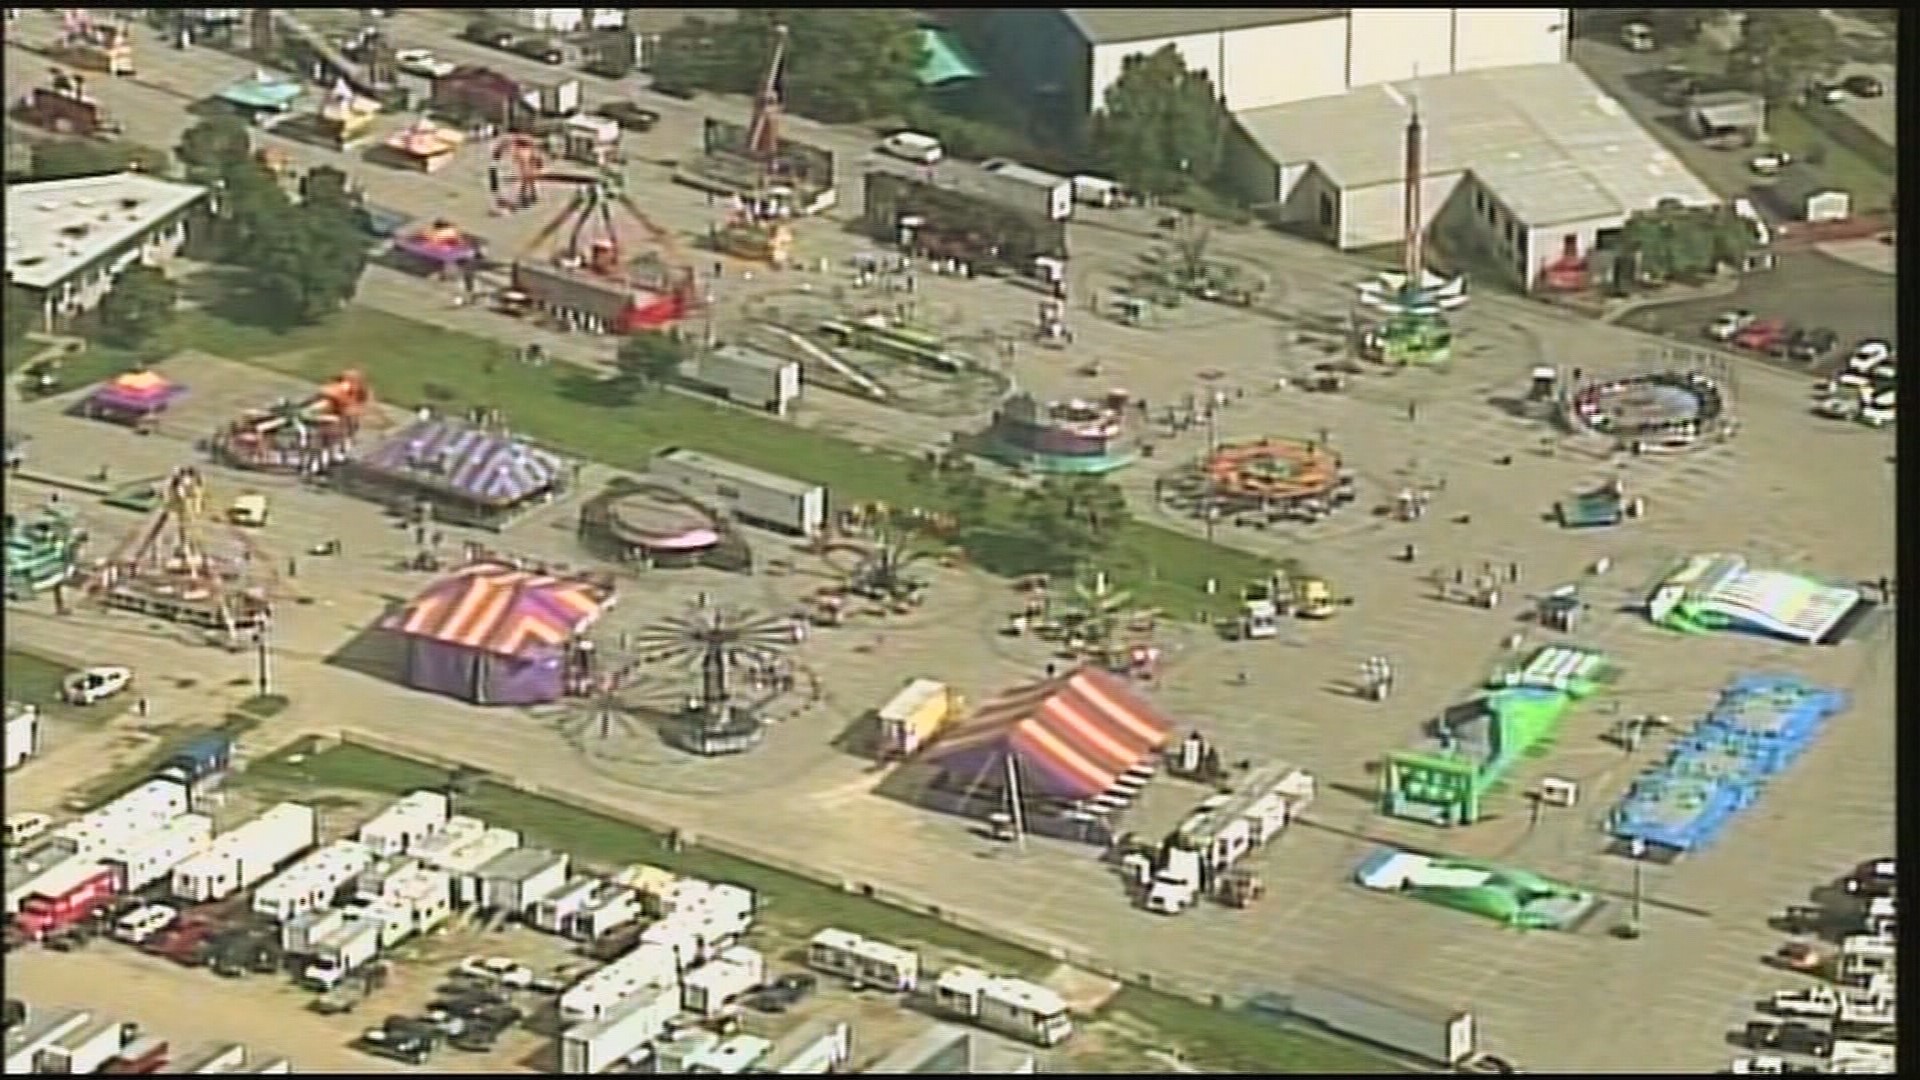 Ride inspectors on schedule ahead of Kentucky State Fair